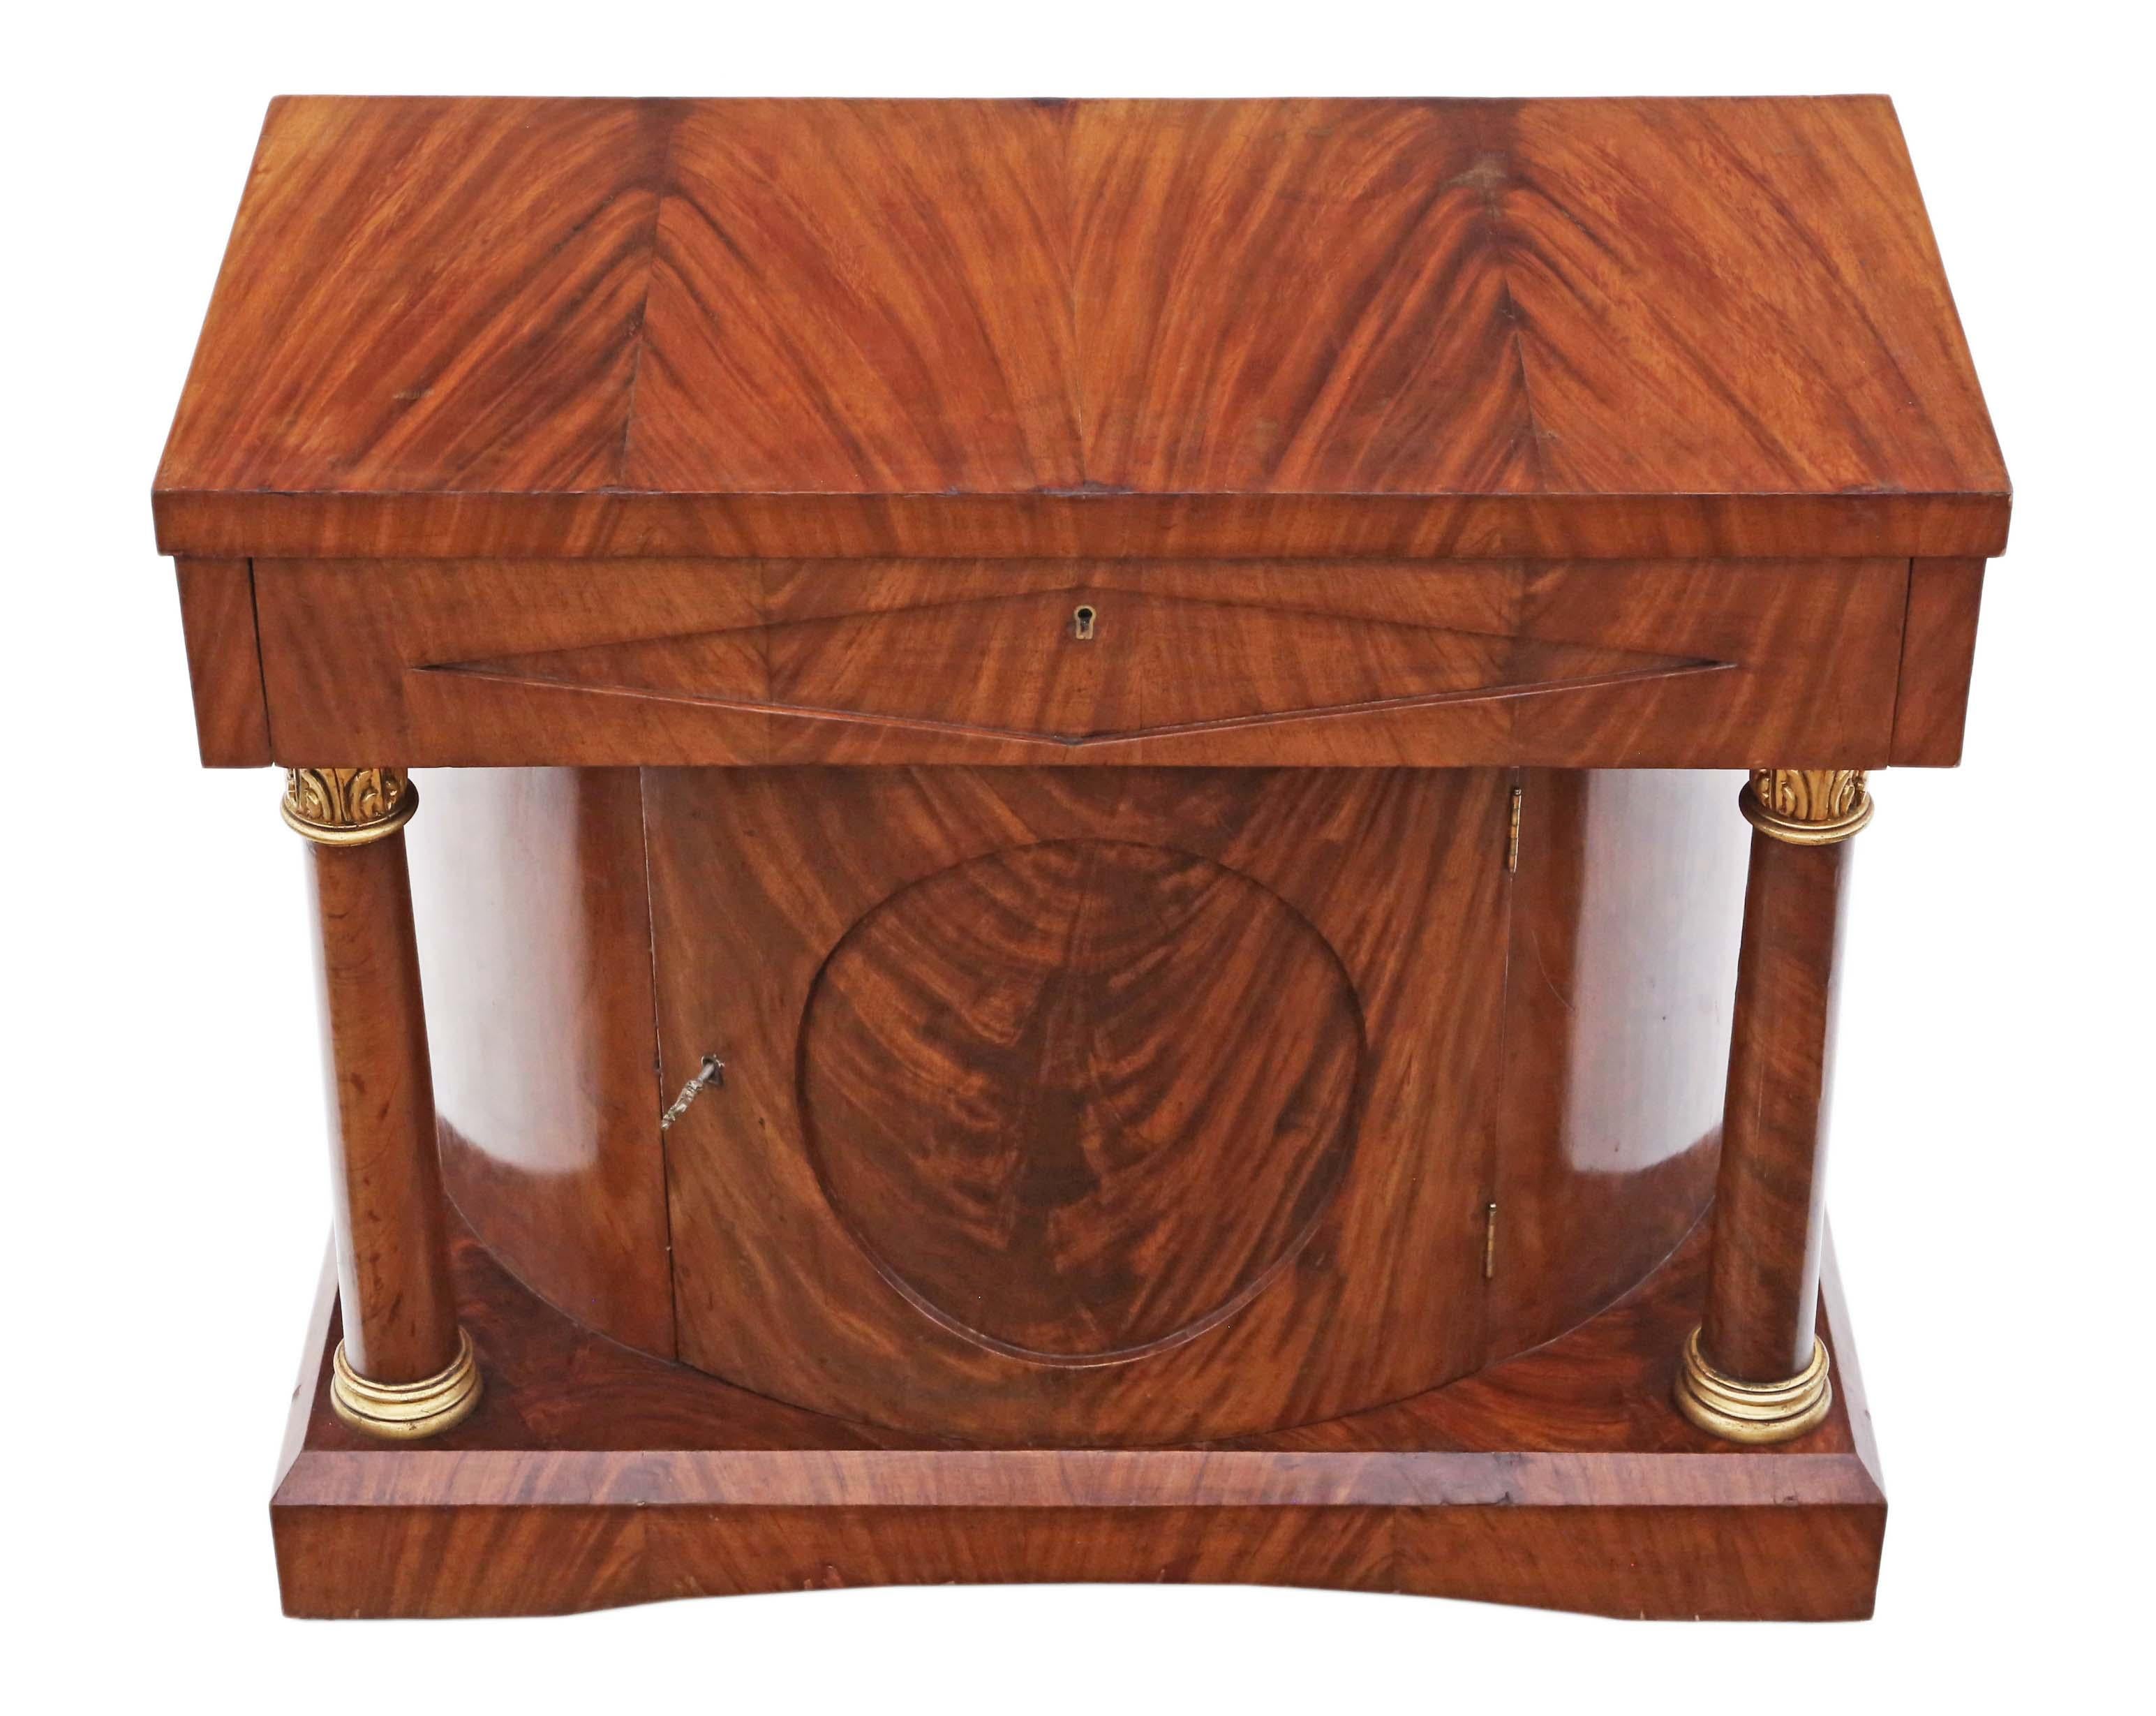 Antique quality mahogany Regency revival console cupboard table C1920.

No loose joints. A rare decorative find with attractive gilt mahogany pilasters. Key for cupboard door only.

Would look great in the right location!

The oak lined drawer